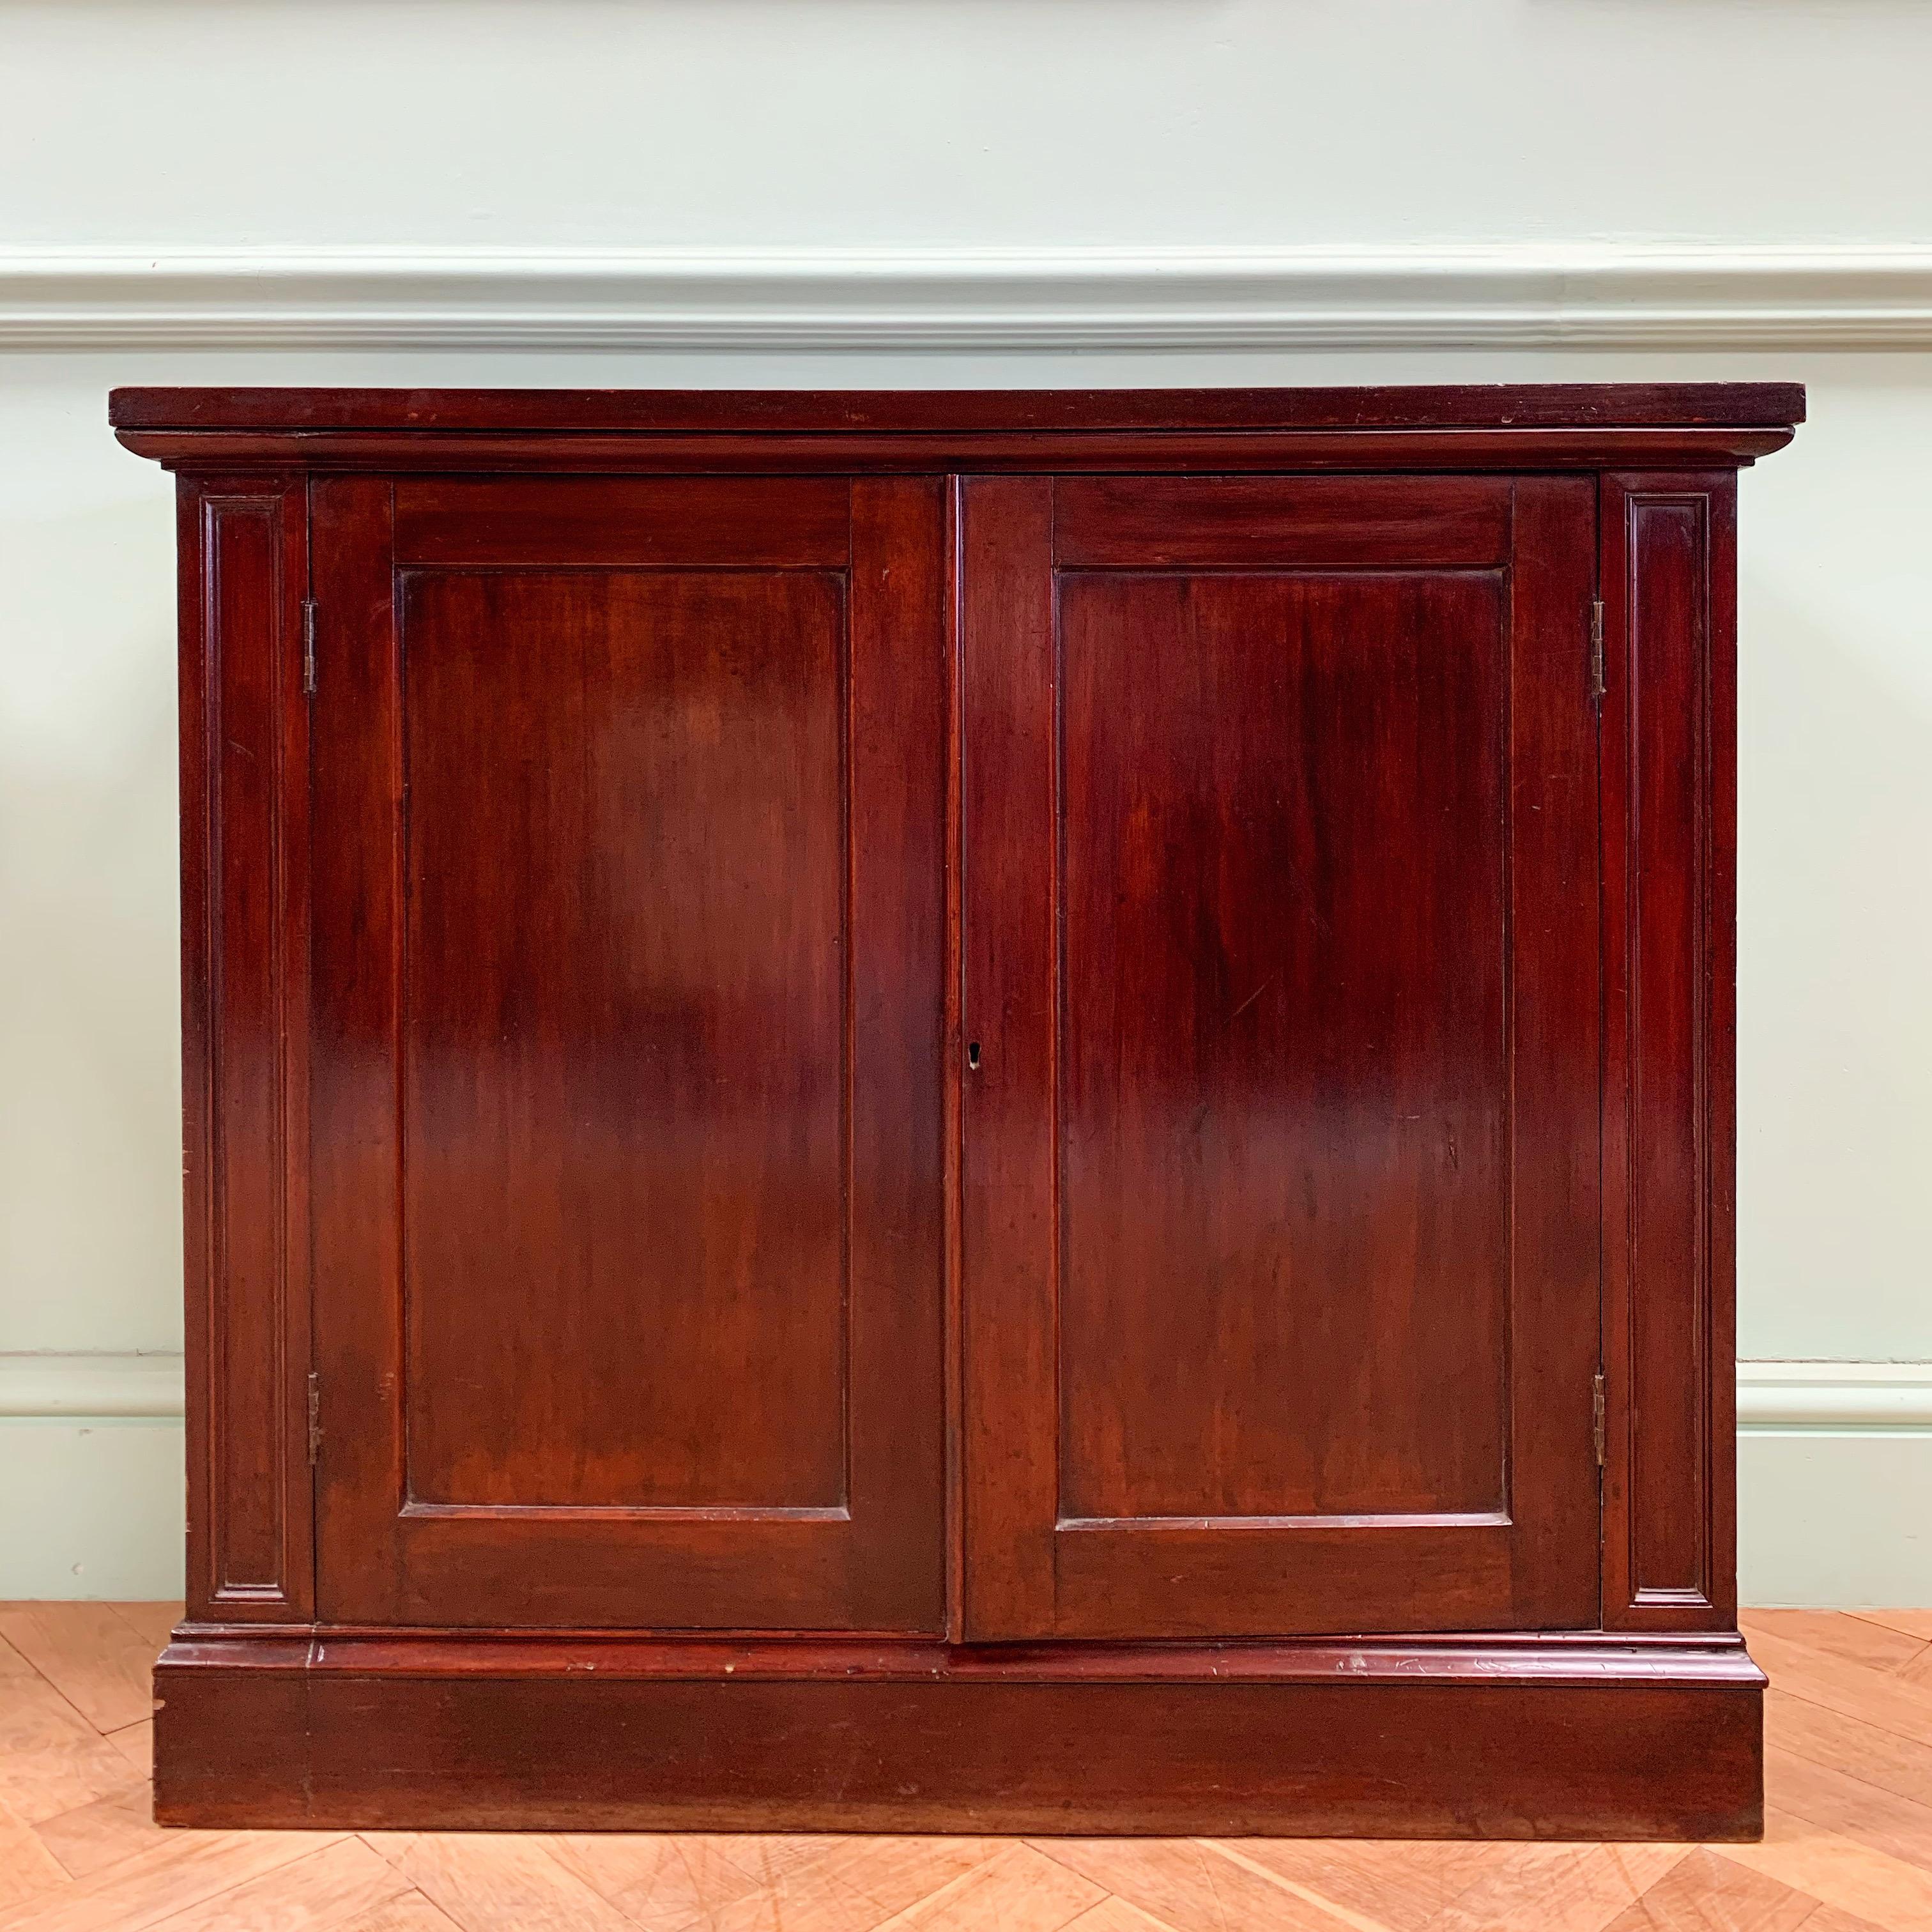 An elegant pair of enclosed consoles of classical proportions with two fielded doors flanked by recessed pilasters with later Seravezza verde marble tops. 

English, Early Nineteenth Century

Inquire about this piece

H 32 1/2 x W 37 1/4 x D 12 1/2